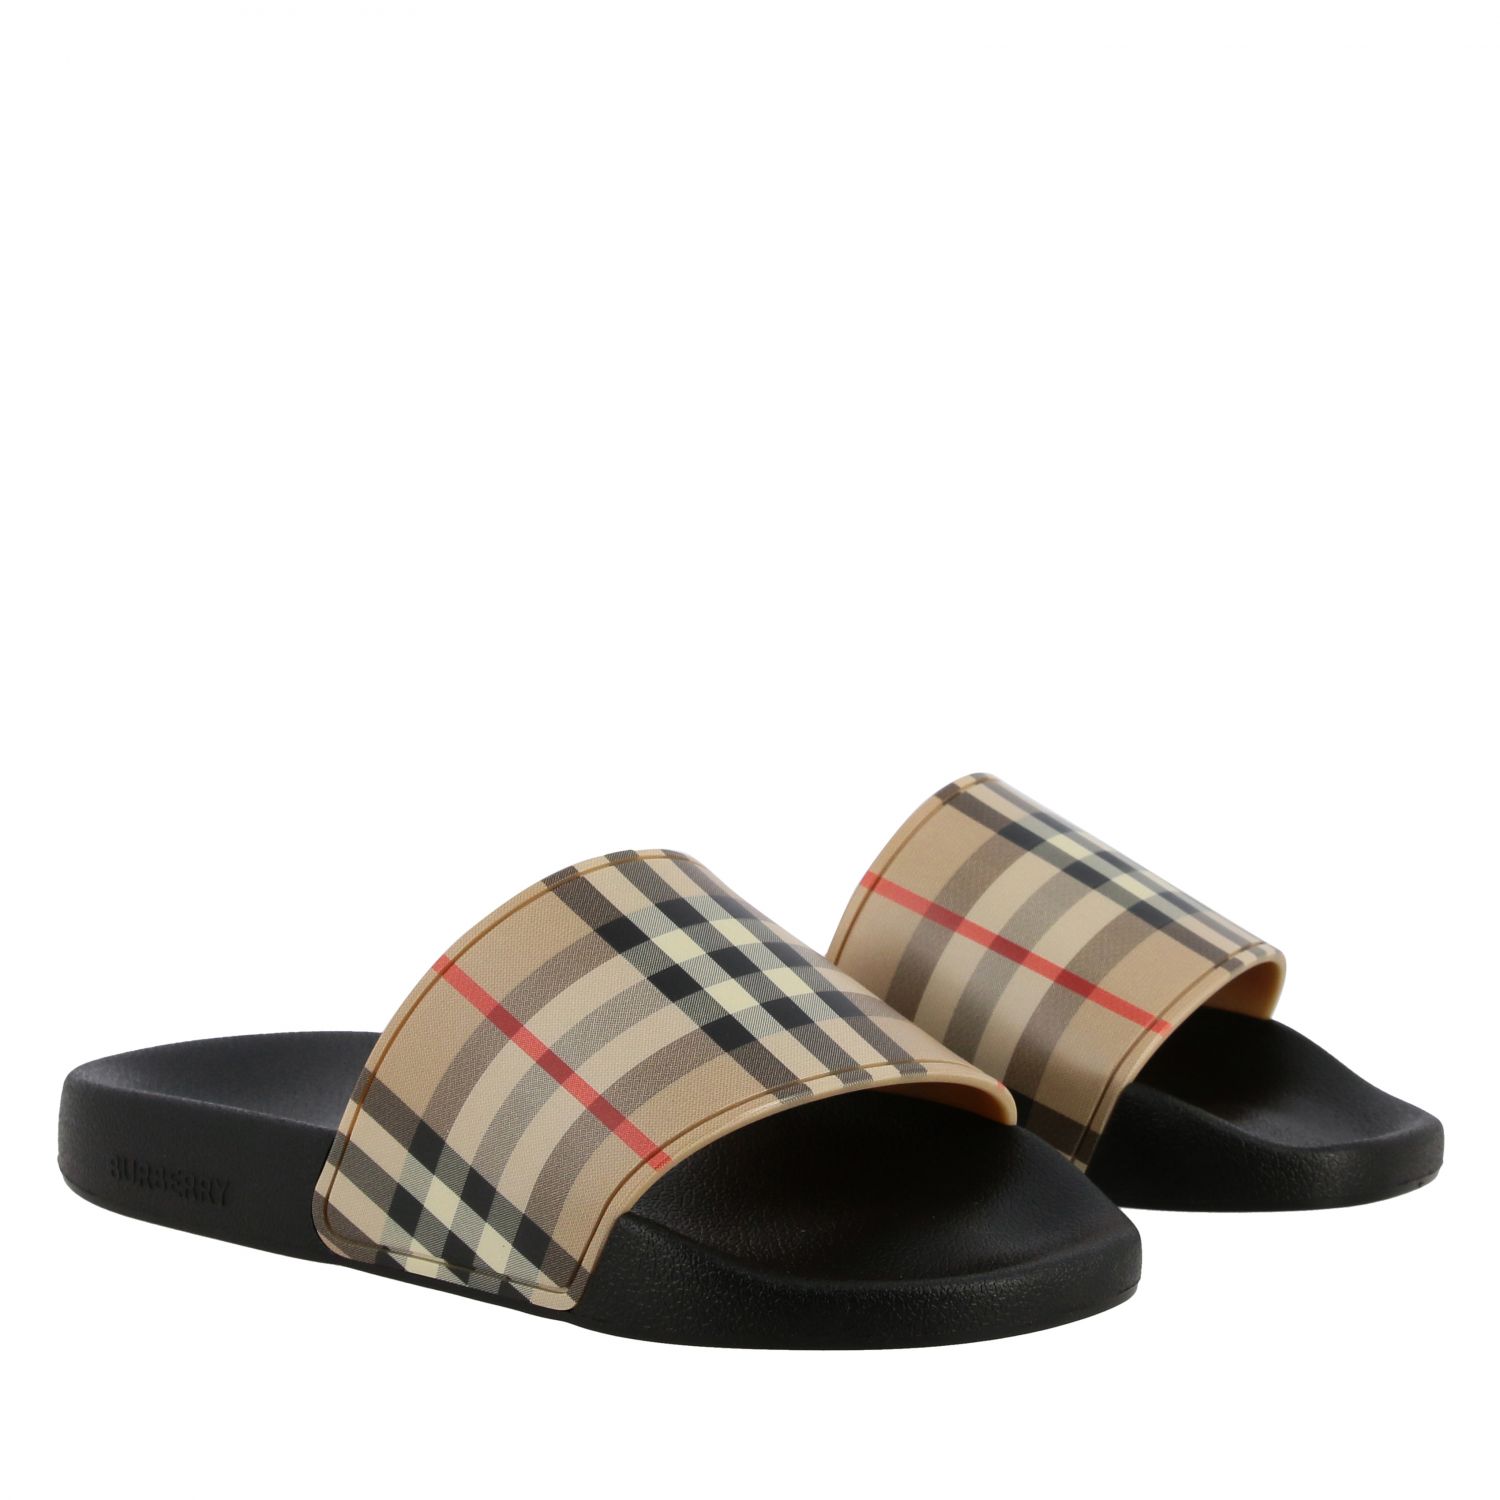 Burberry sandal with check pattern 